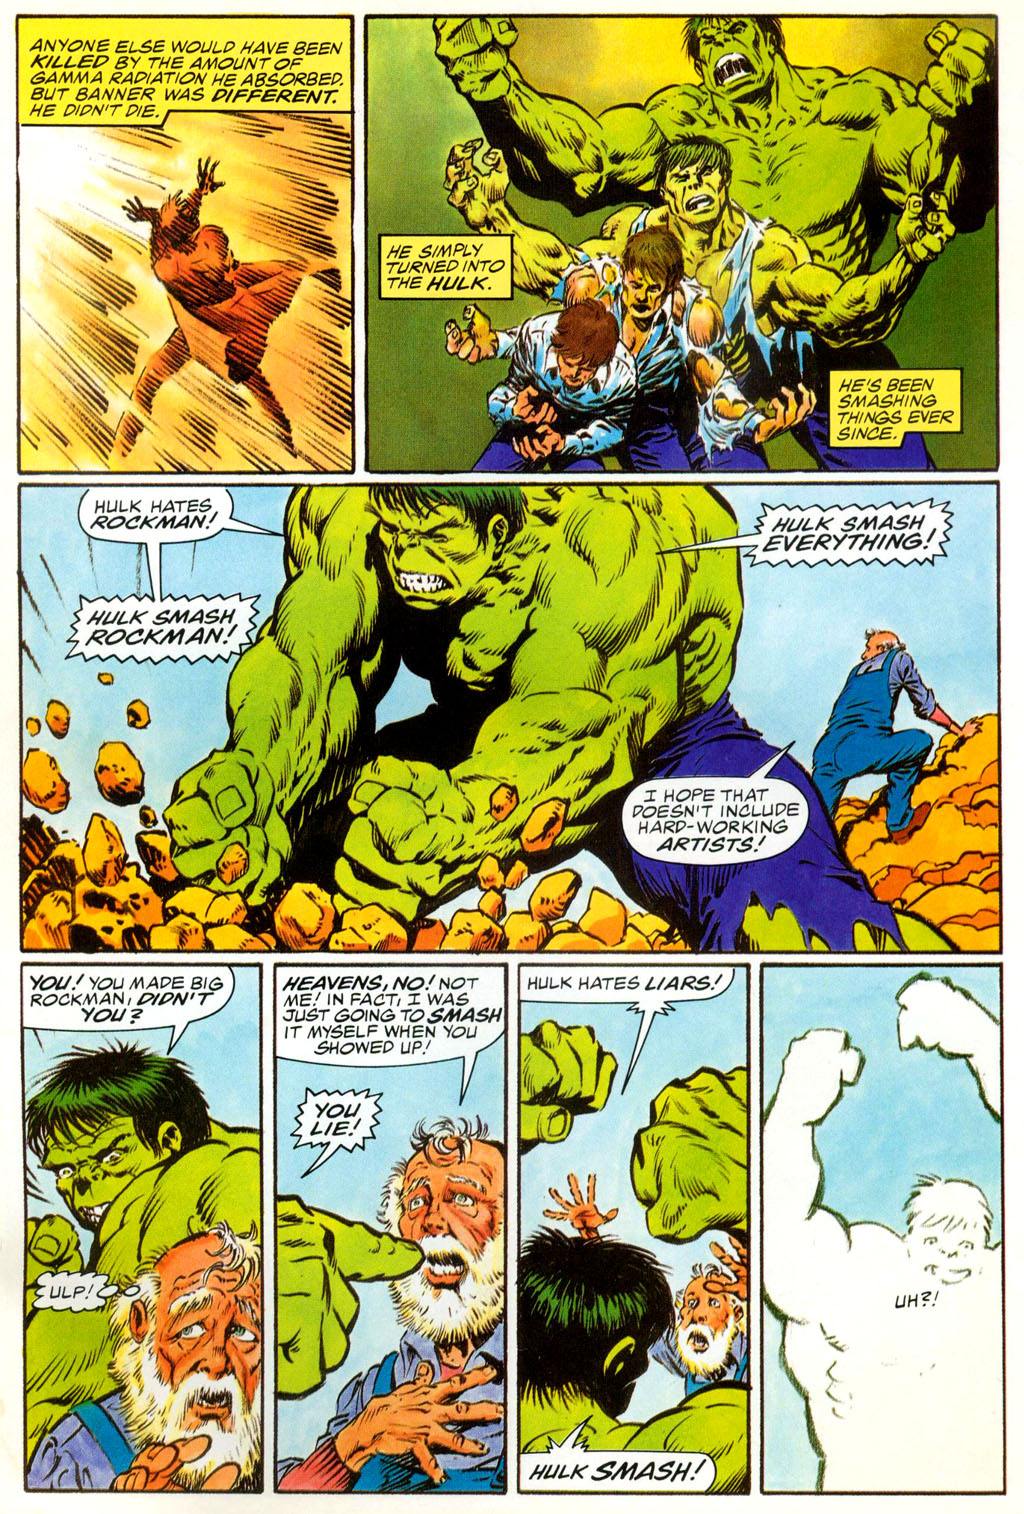 Read online Marvel Graphic Novel comic -  Issue #29 - Hulk & Thing - The Big Change - 11